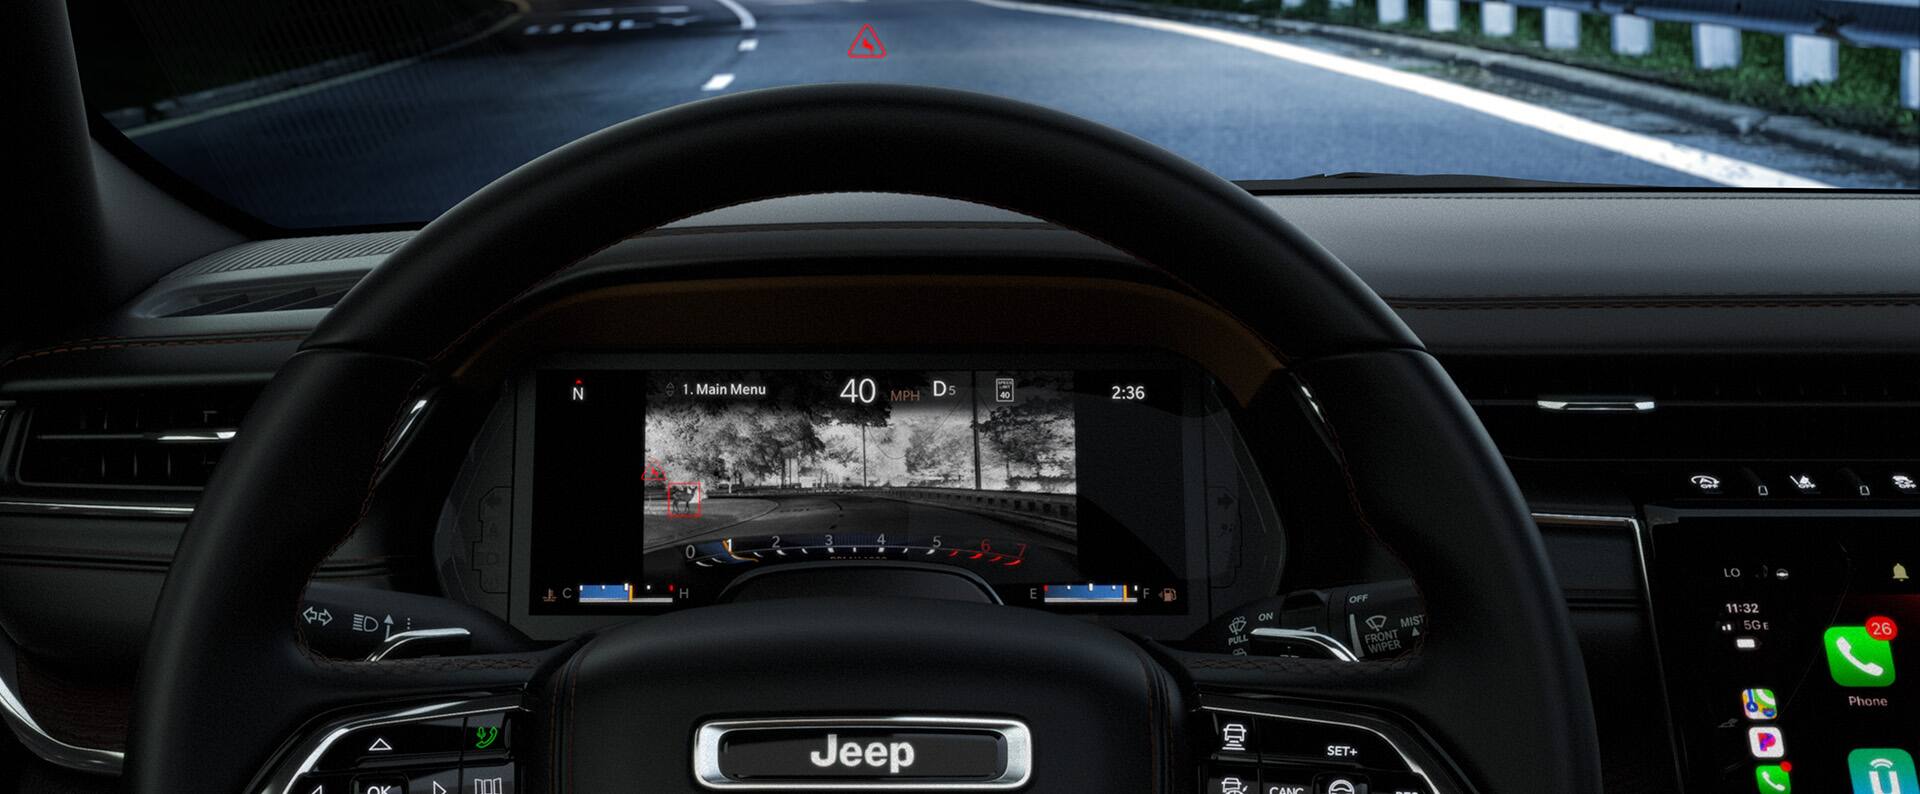 The Driver Information Digital Cluster Display in the 2023 Jeep Grand Cherokee showing the view of the darkened road ahead, with potential obstacles highlighted in red.